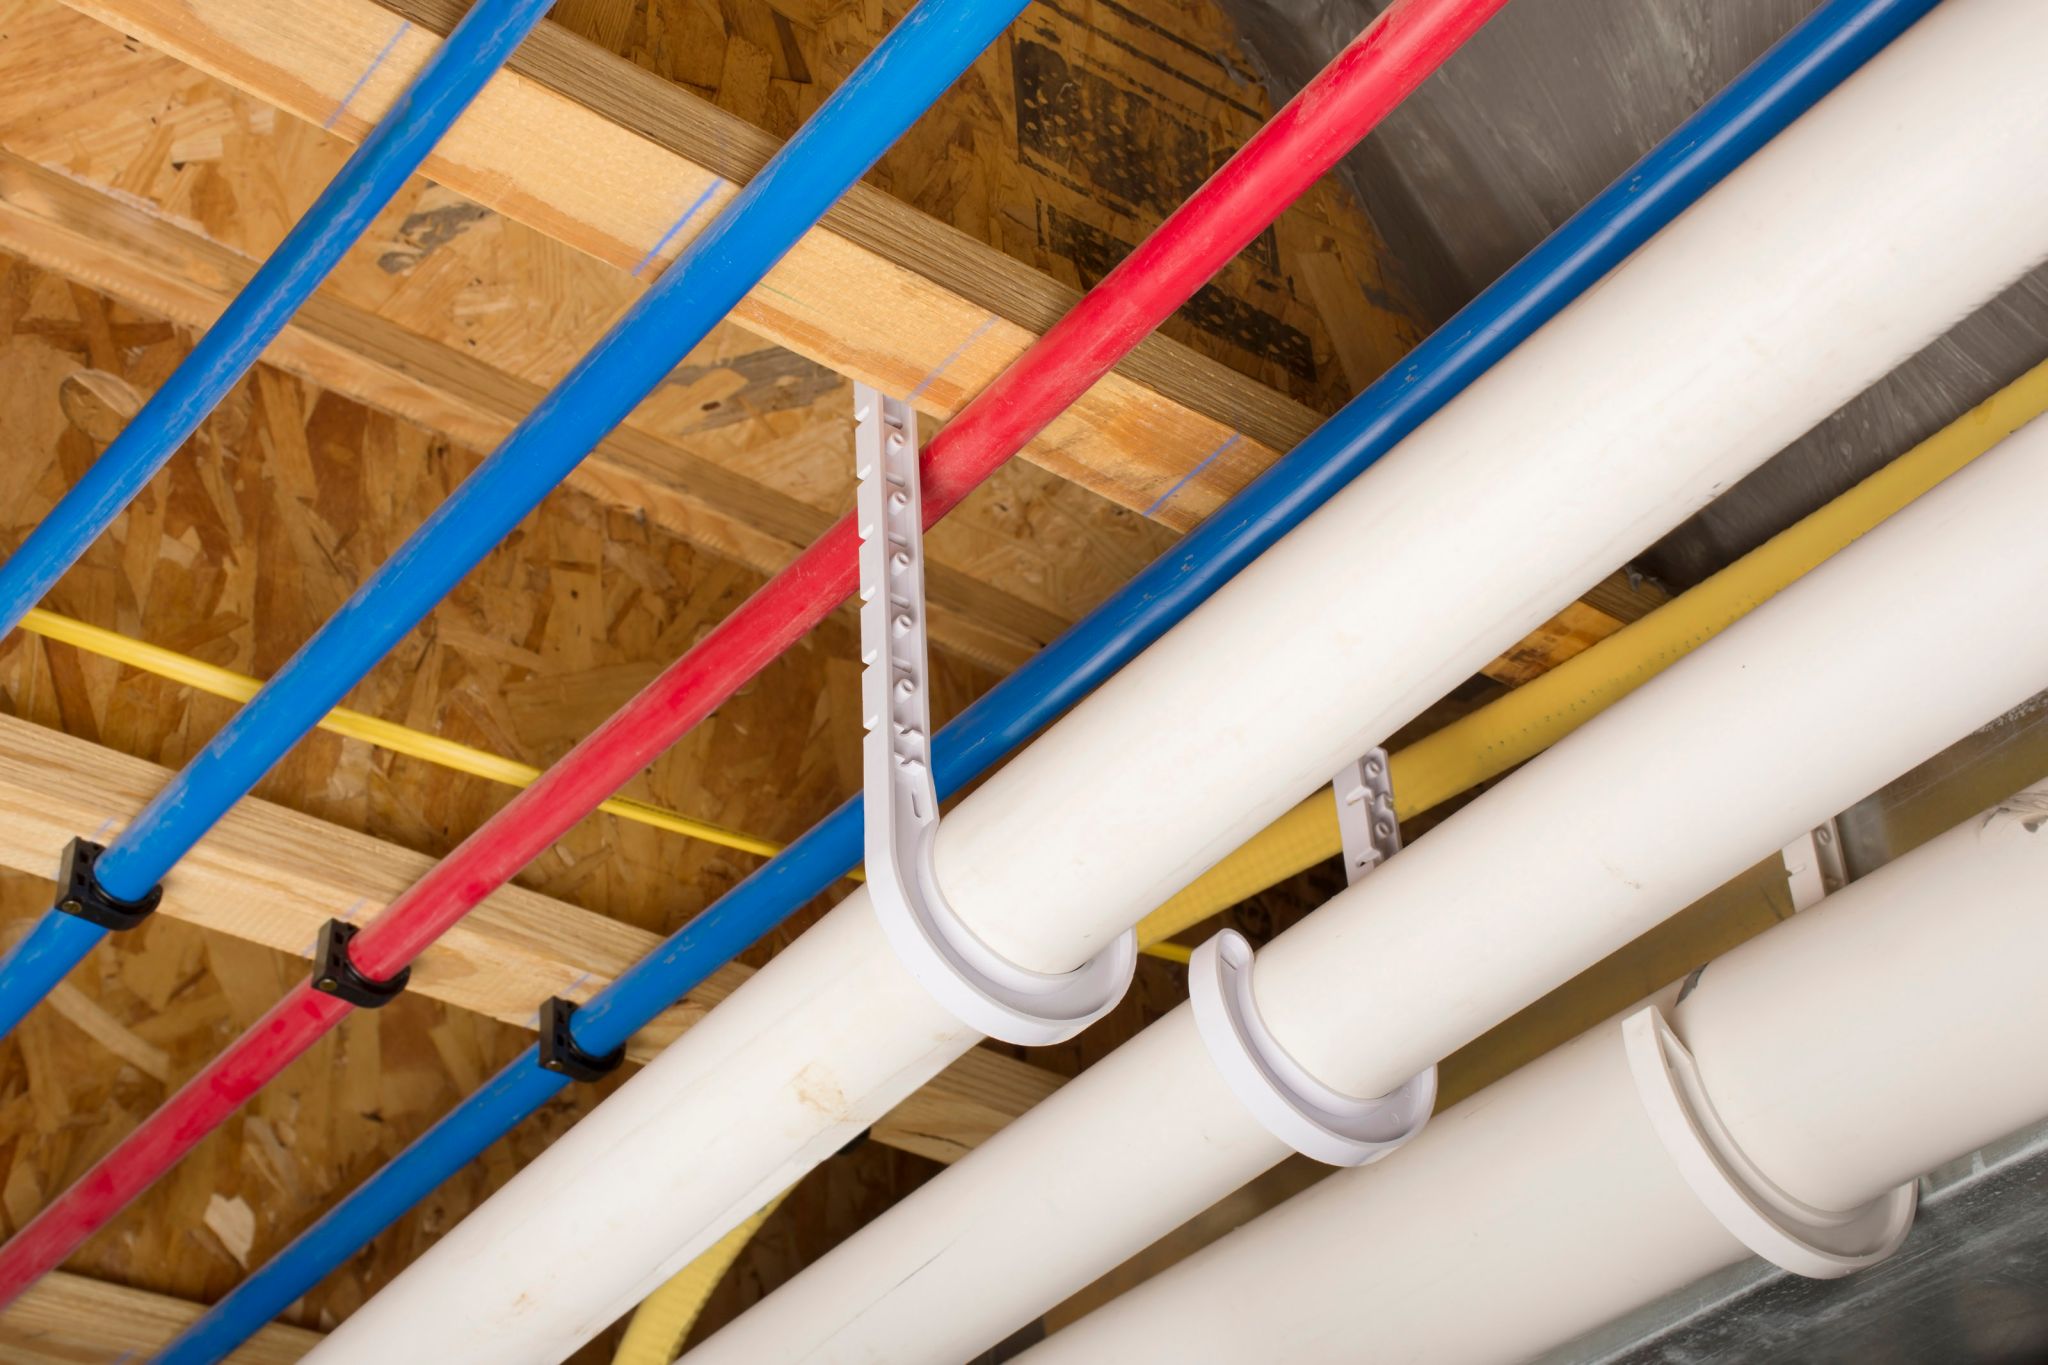 PEX plumbing pipes and drain pipes attached to the basement ceiling of a home.